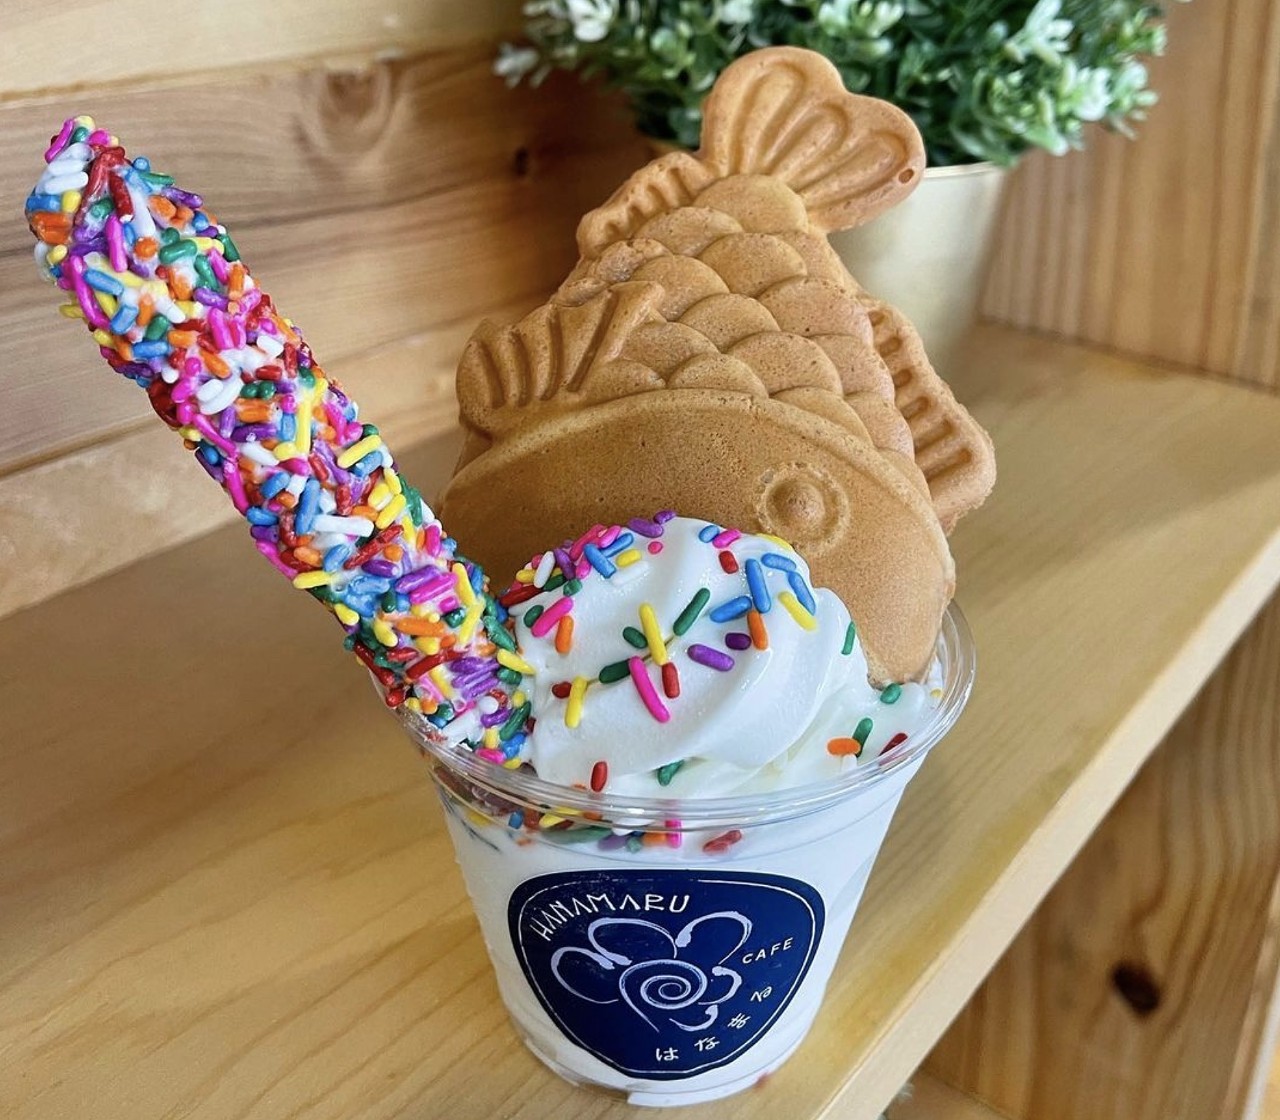 Try out a taiyaki ice cream cone at Hanamaru Cafe
7460 Callaghan Rd #333, instagram.com/hanamarucafetx
Hanamaru Cafe made its debut in Balcones Heights next door to Minnano Japanese Grocery in April of 2022. In addition to offering sweet and savory versions of fish-shaped taiyaki cakes, Hanamaru has summer-worthy ice cream cone options on its menu, a tasty way to cool off.
Photo via Instagram / hanamarucafetx